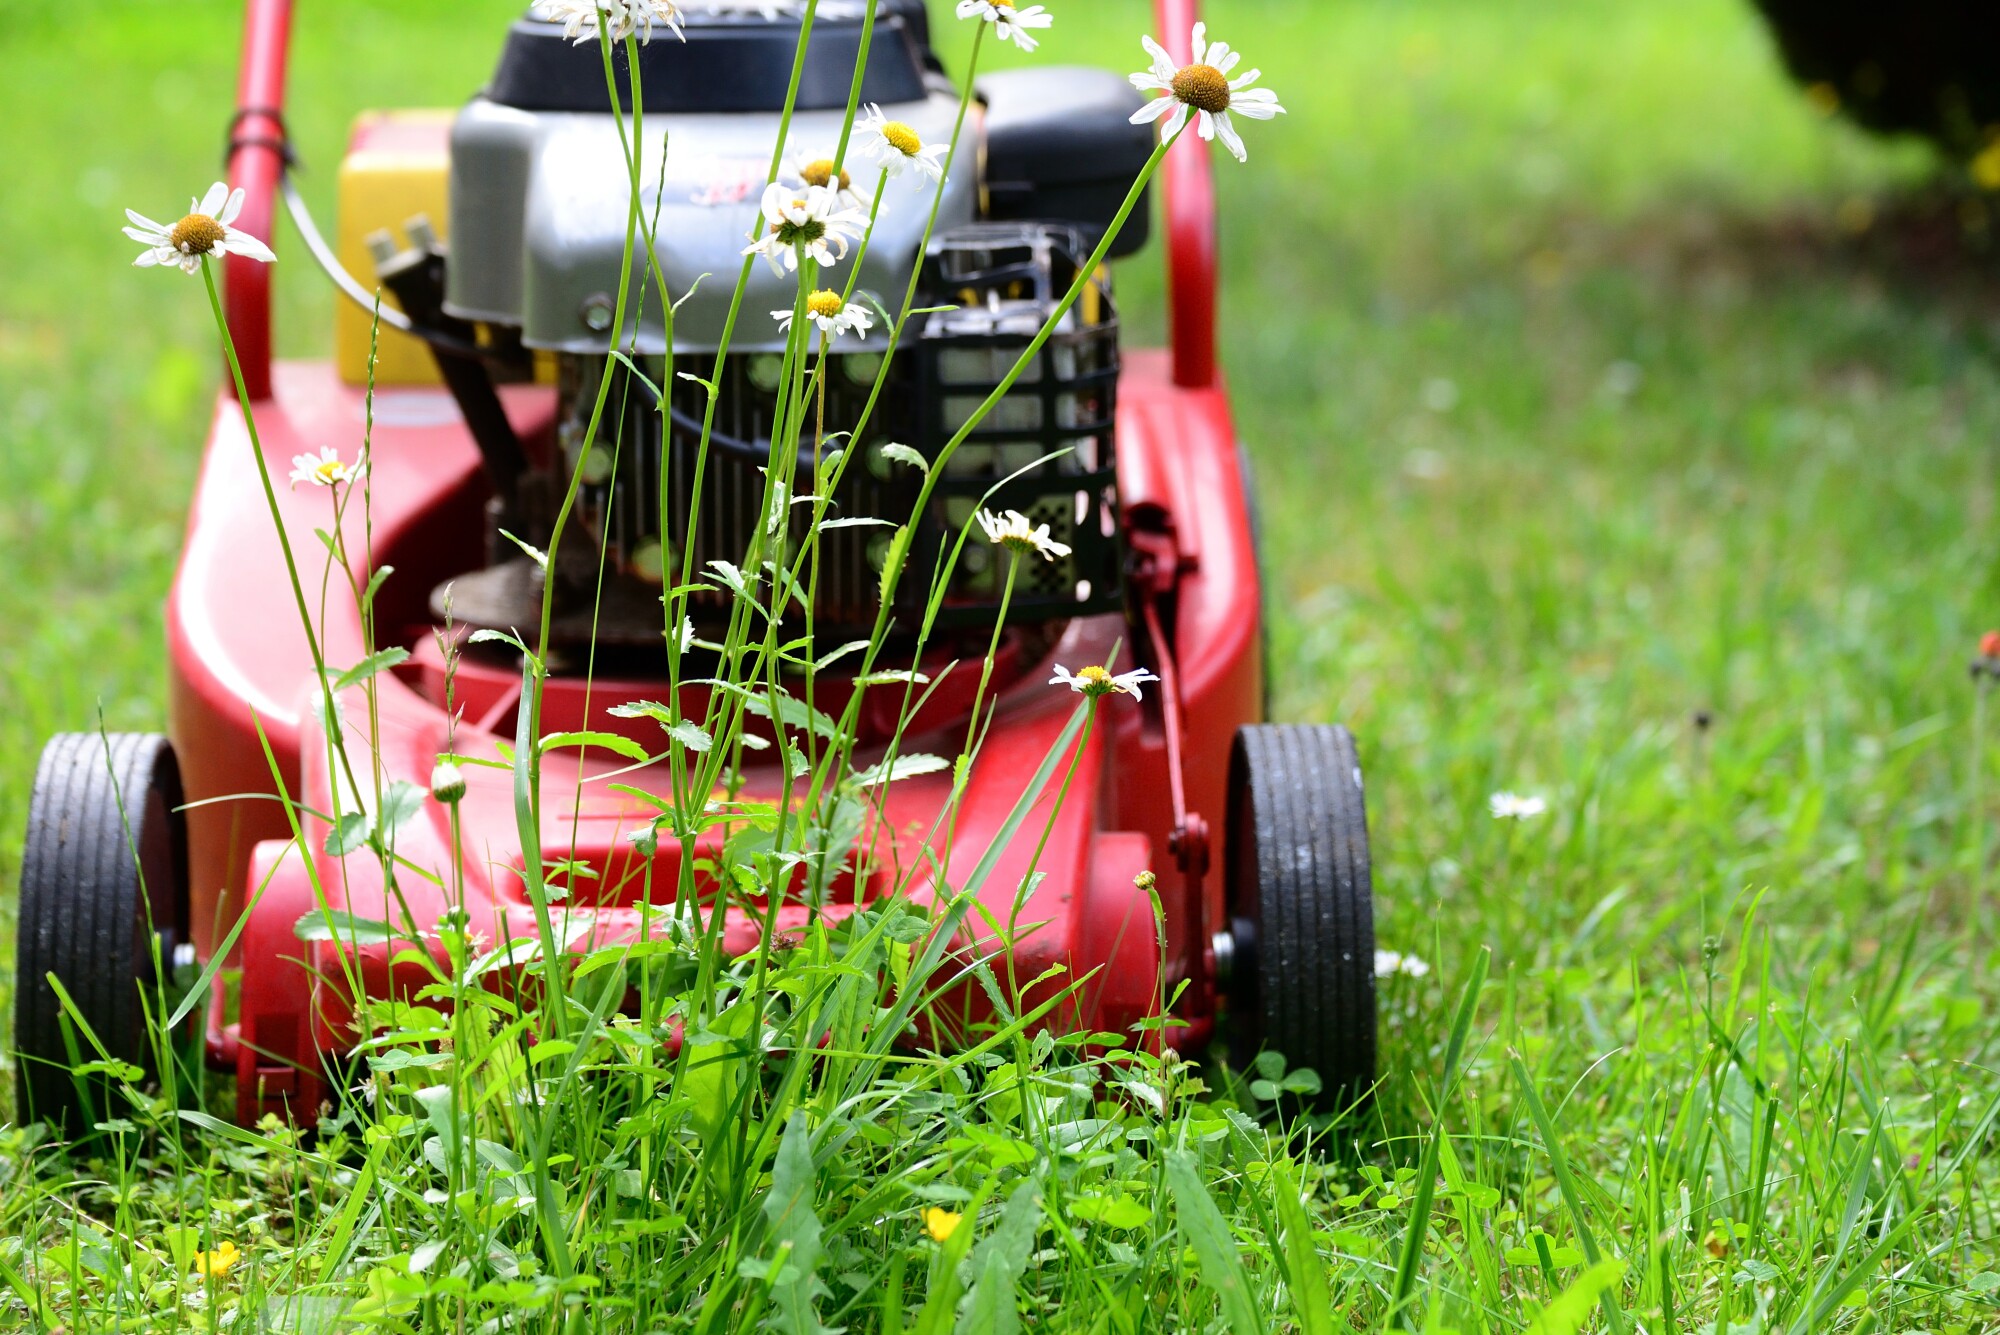 How to Find the Best Residential and Commercial Lawn Care Service in Bethesda, MD